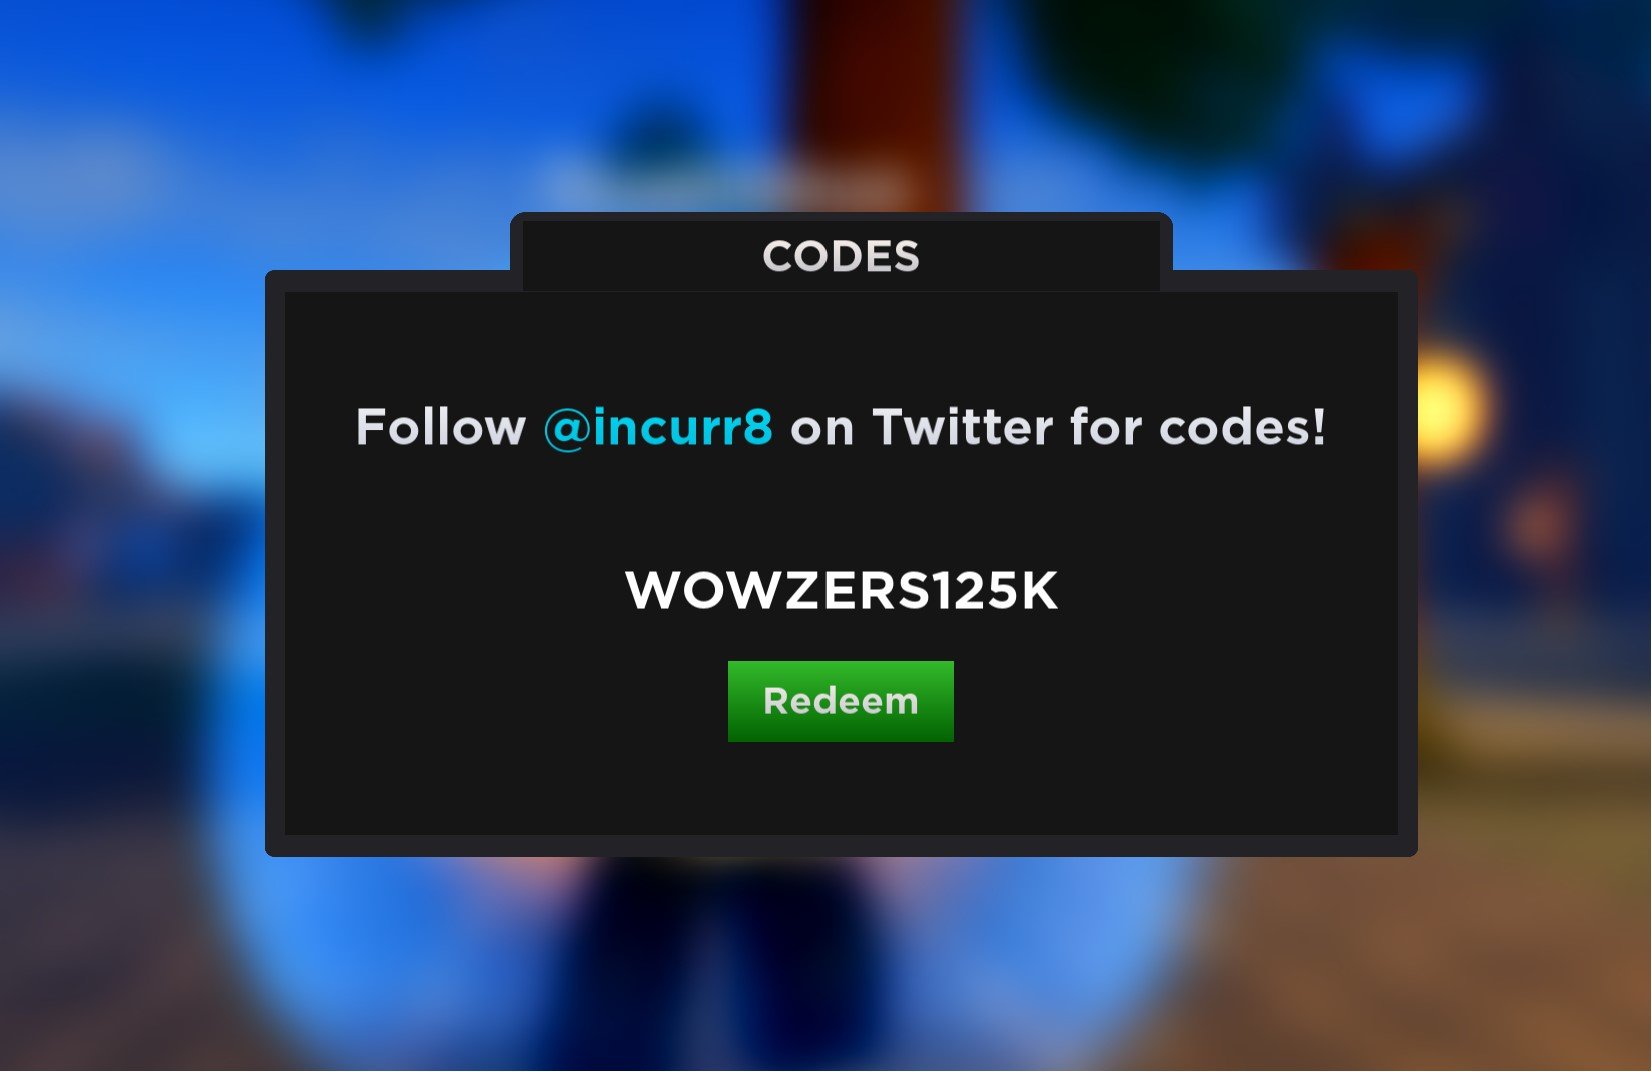 NEW* ALL WORKING CODES FOR HAZE PIECE IN 2023! ROBLOX HAZE PIECE CODES 